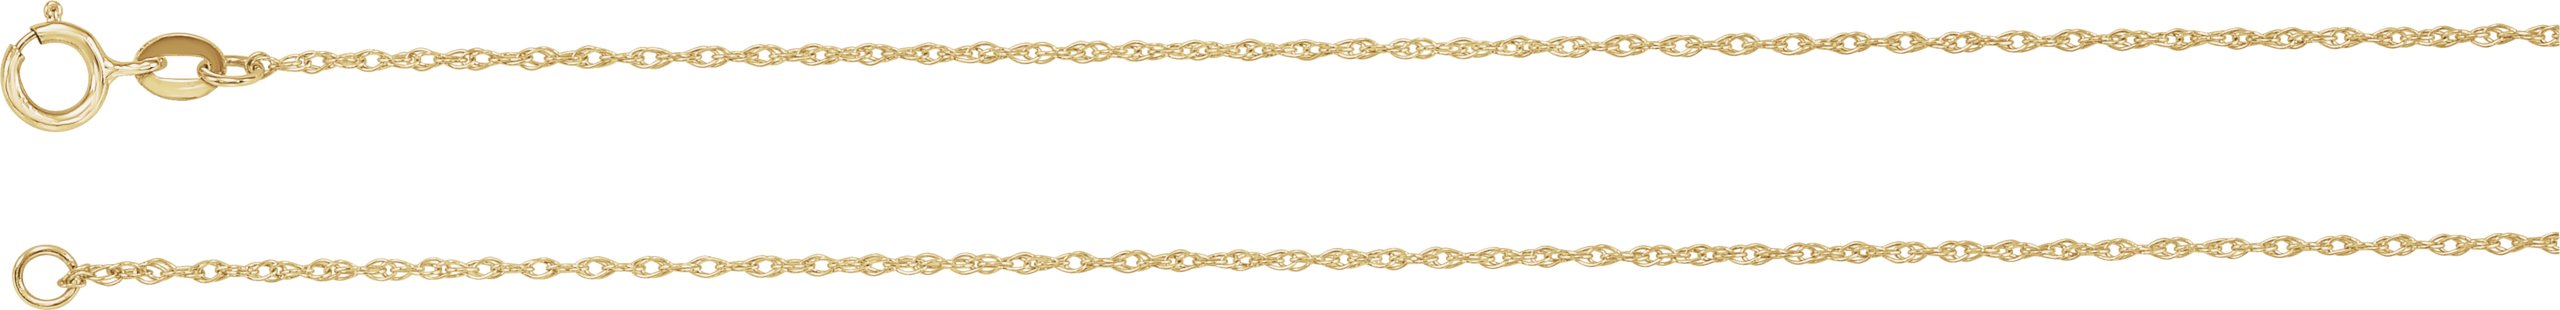 14K Yellow Gold Filled 1 mm Solid Rope 20 inch Chain Ref. 13550617